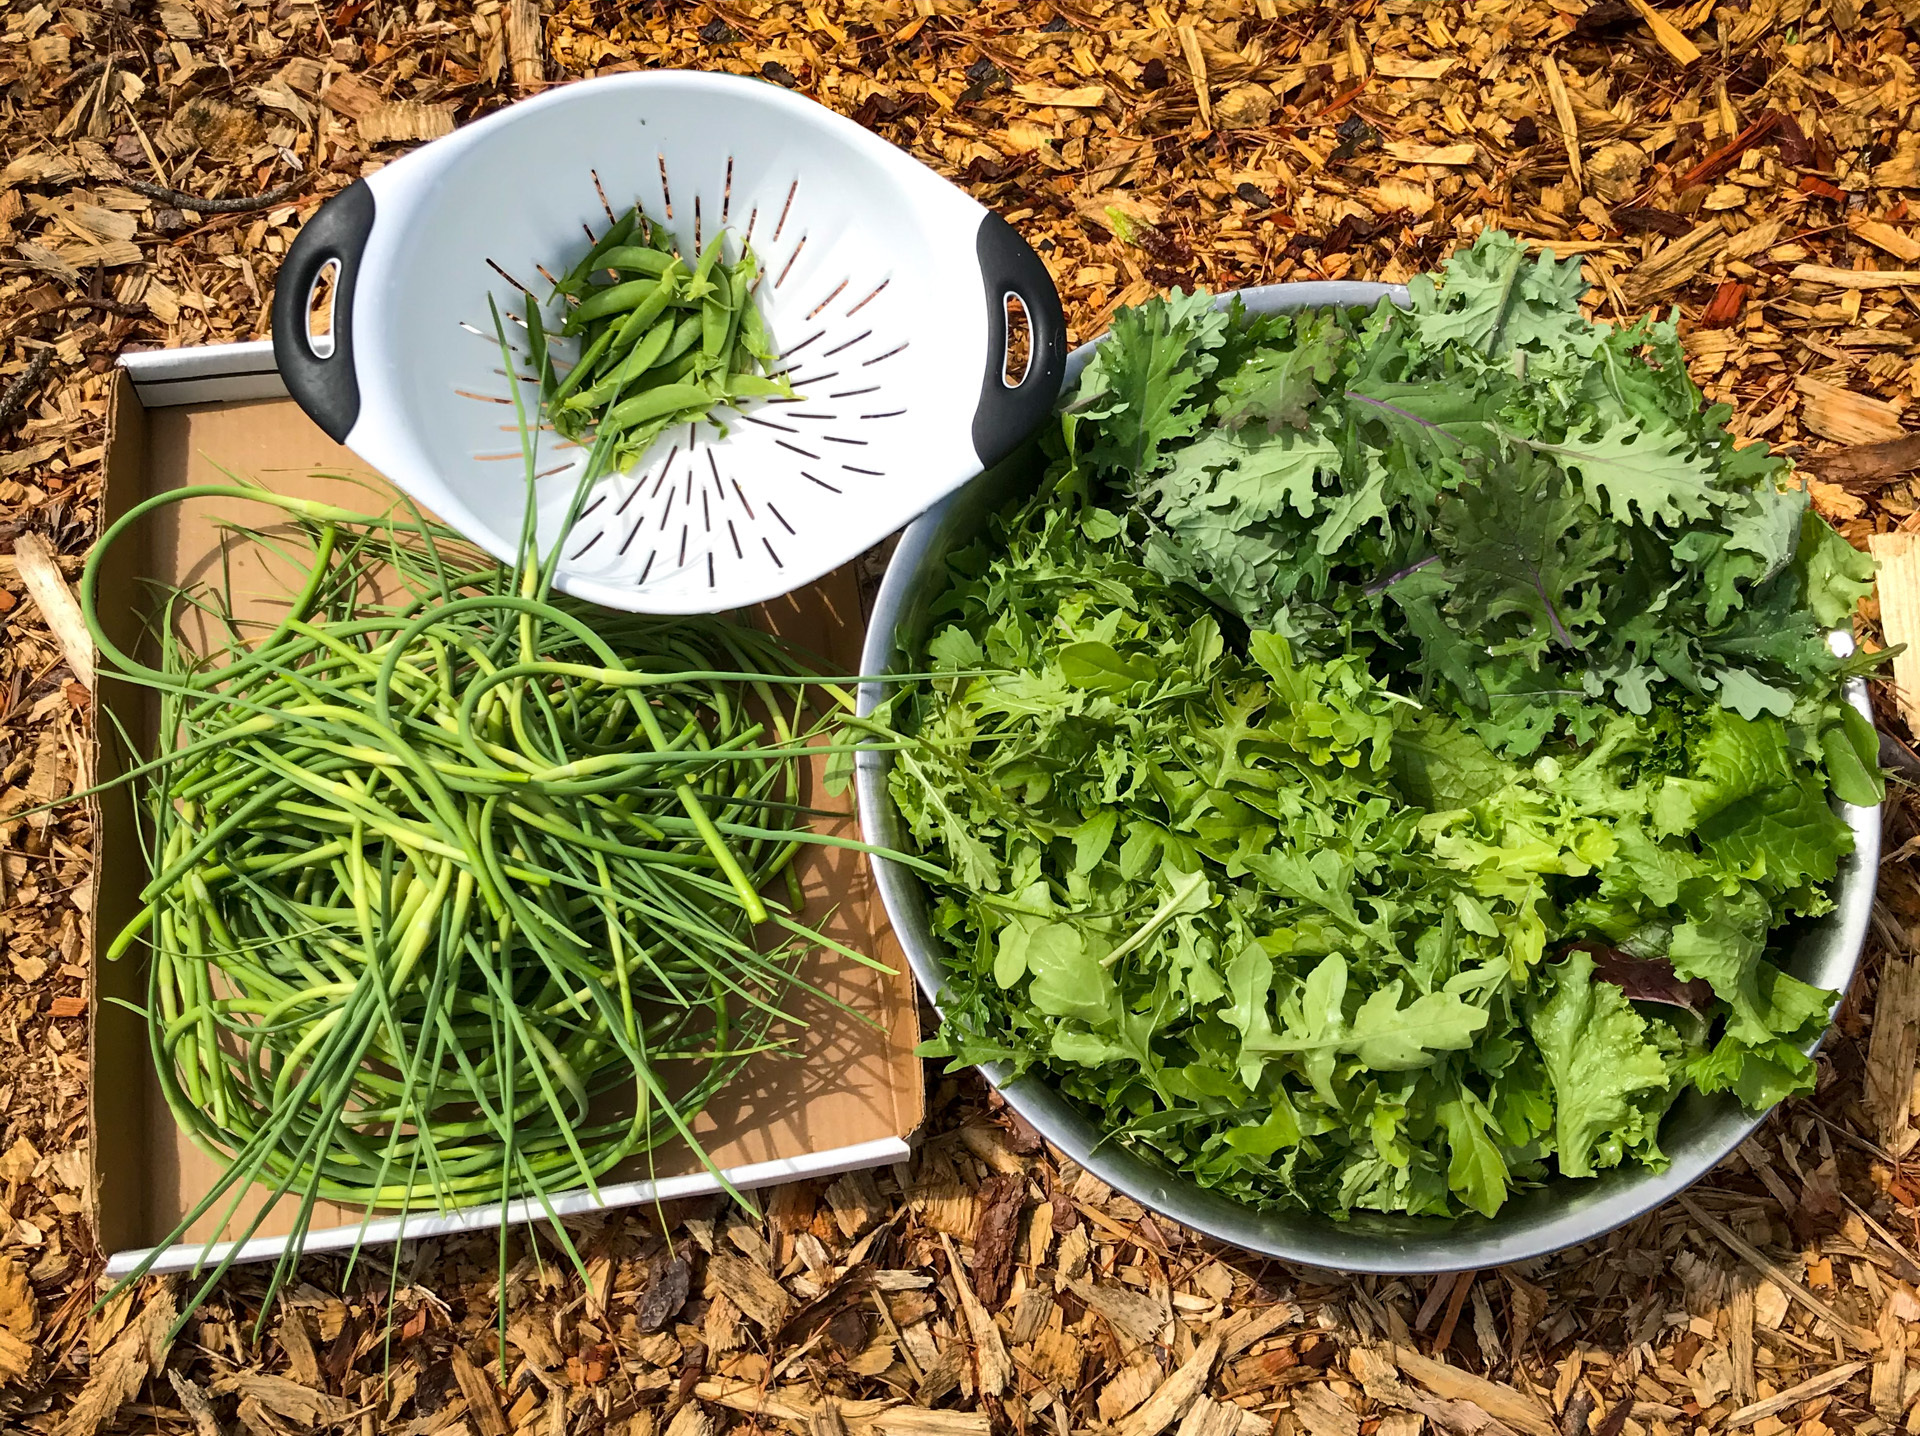 ECI's first 2020 pantry donation harvest. Snap peas, garlic scapes, arugula, kale and mixed greens.